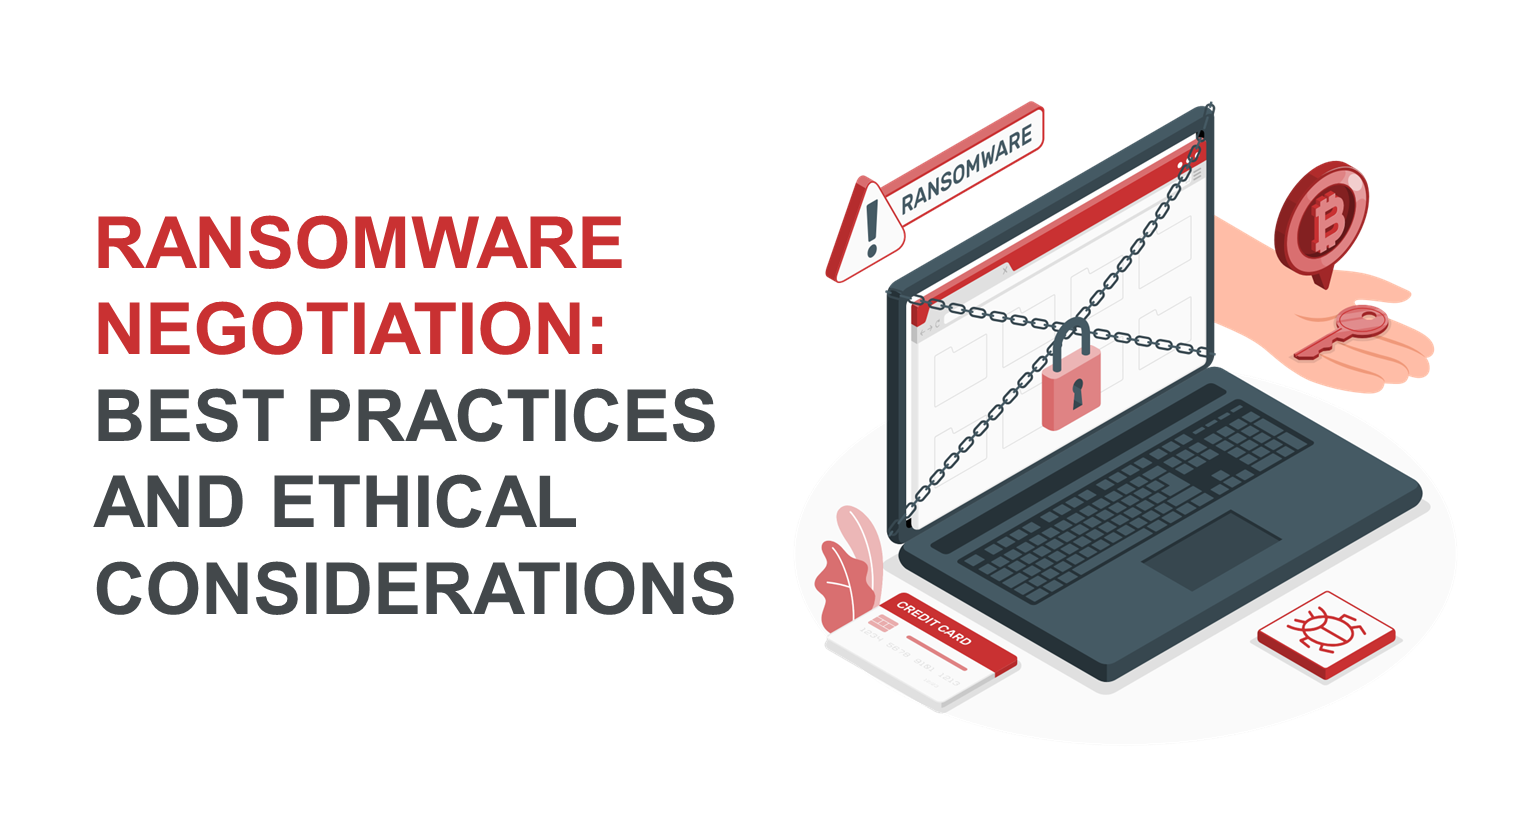 Ransomware Negotiation: Best Practices and Ethical Considerations